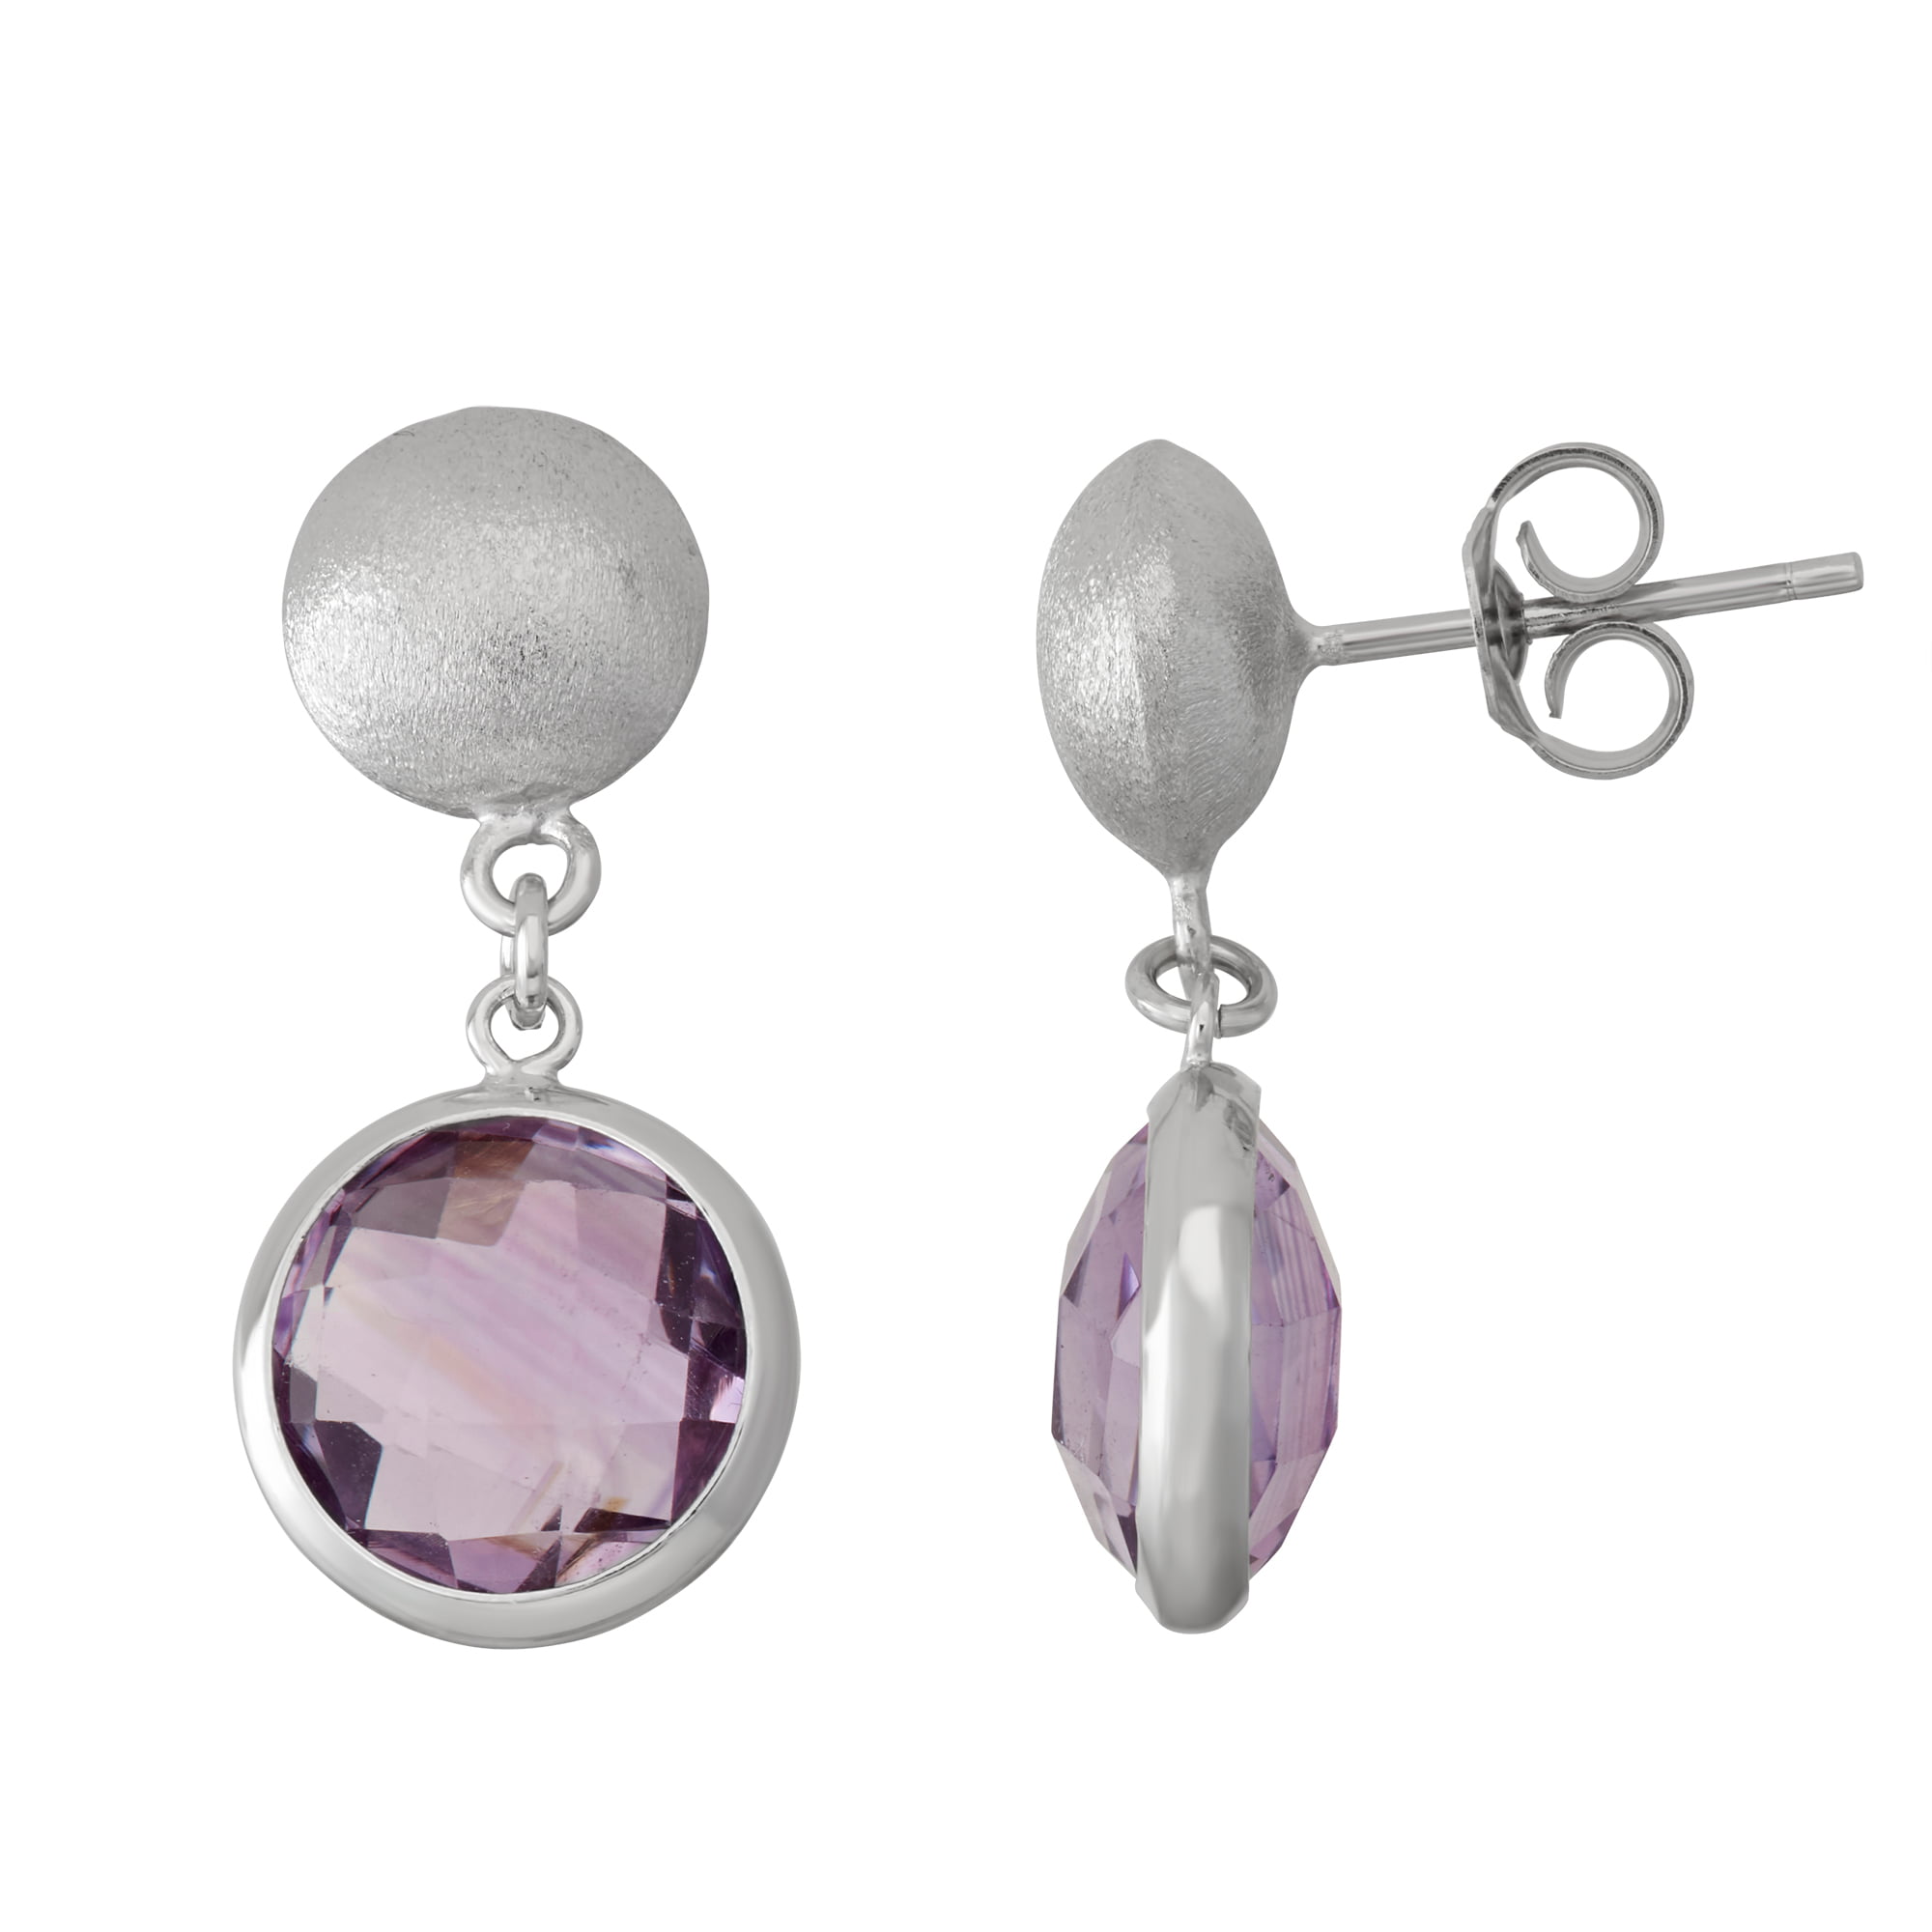 Top quality natural Amethyst stone 10 mm ball sterling silver leverback earrings 